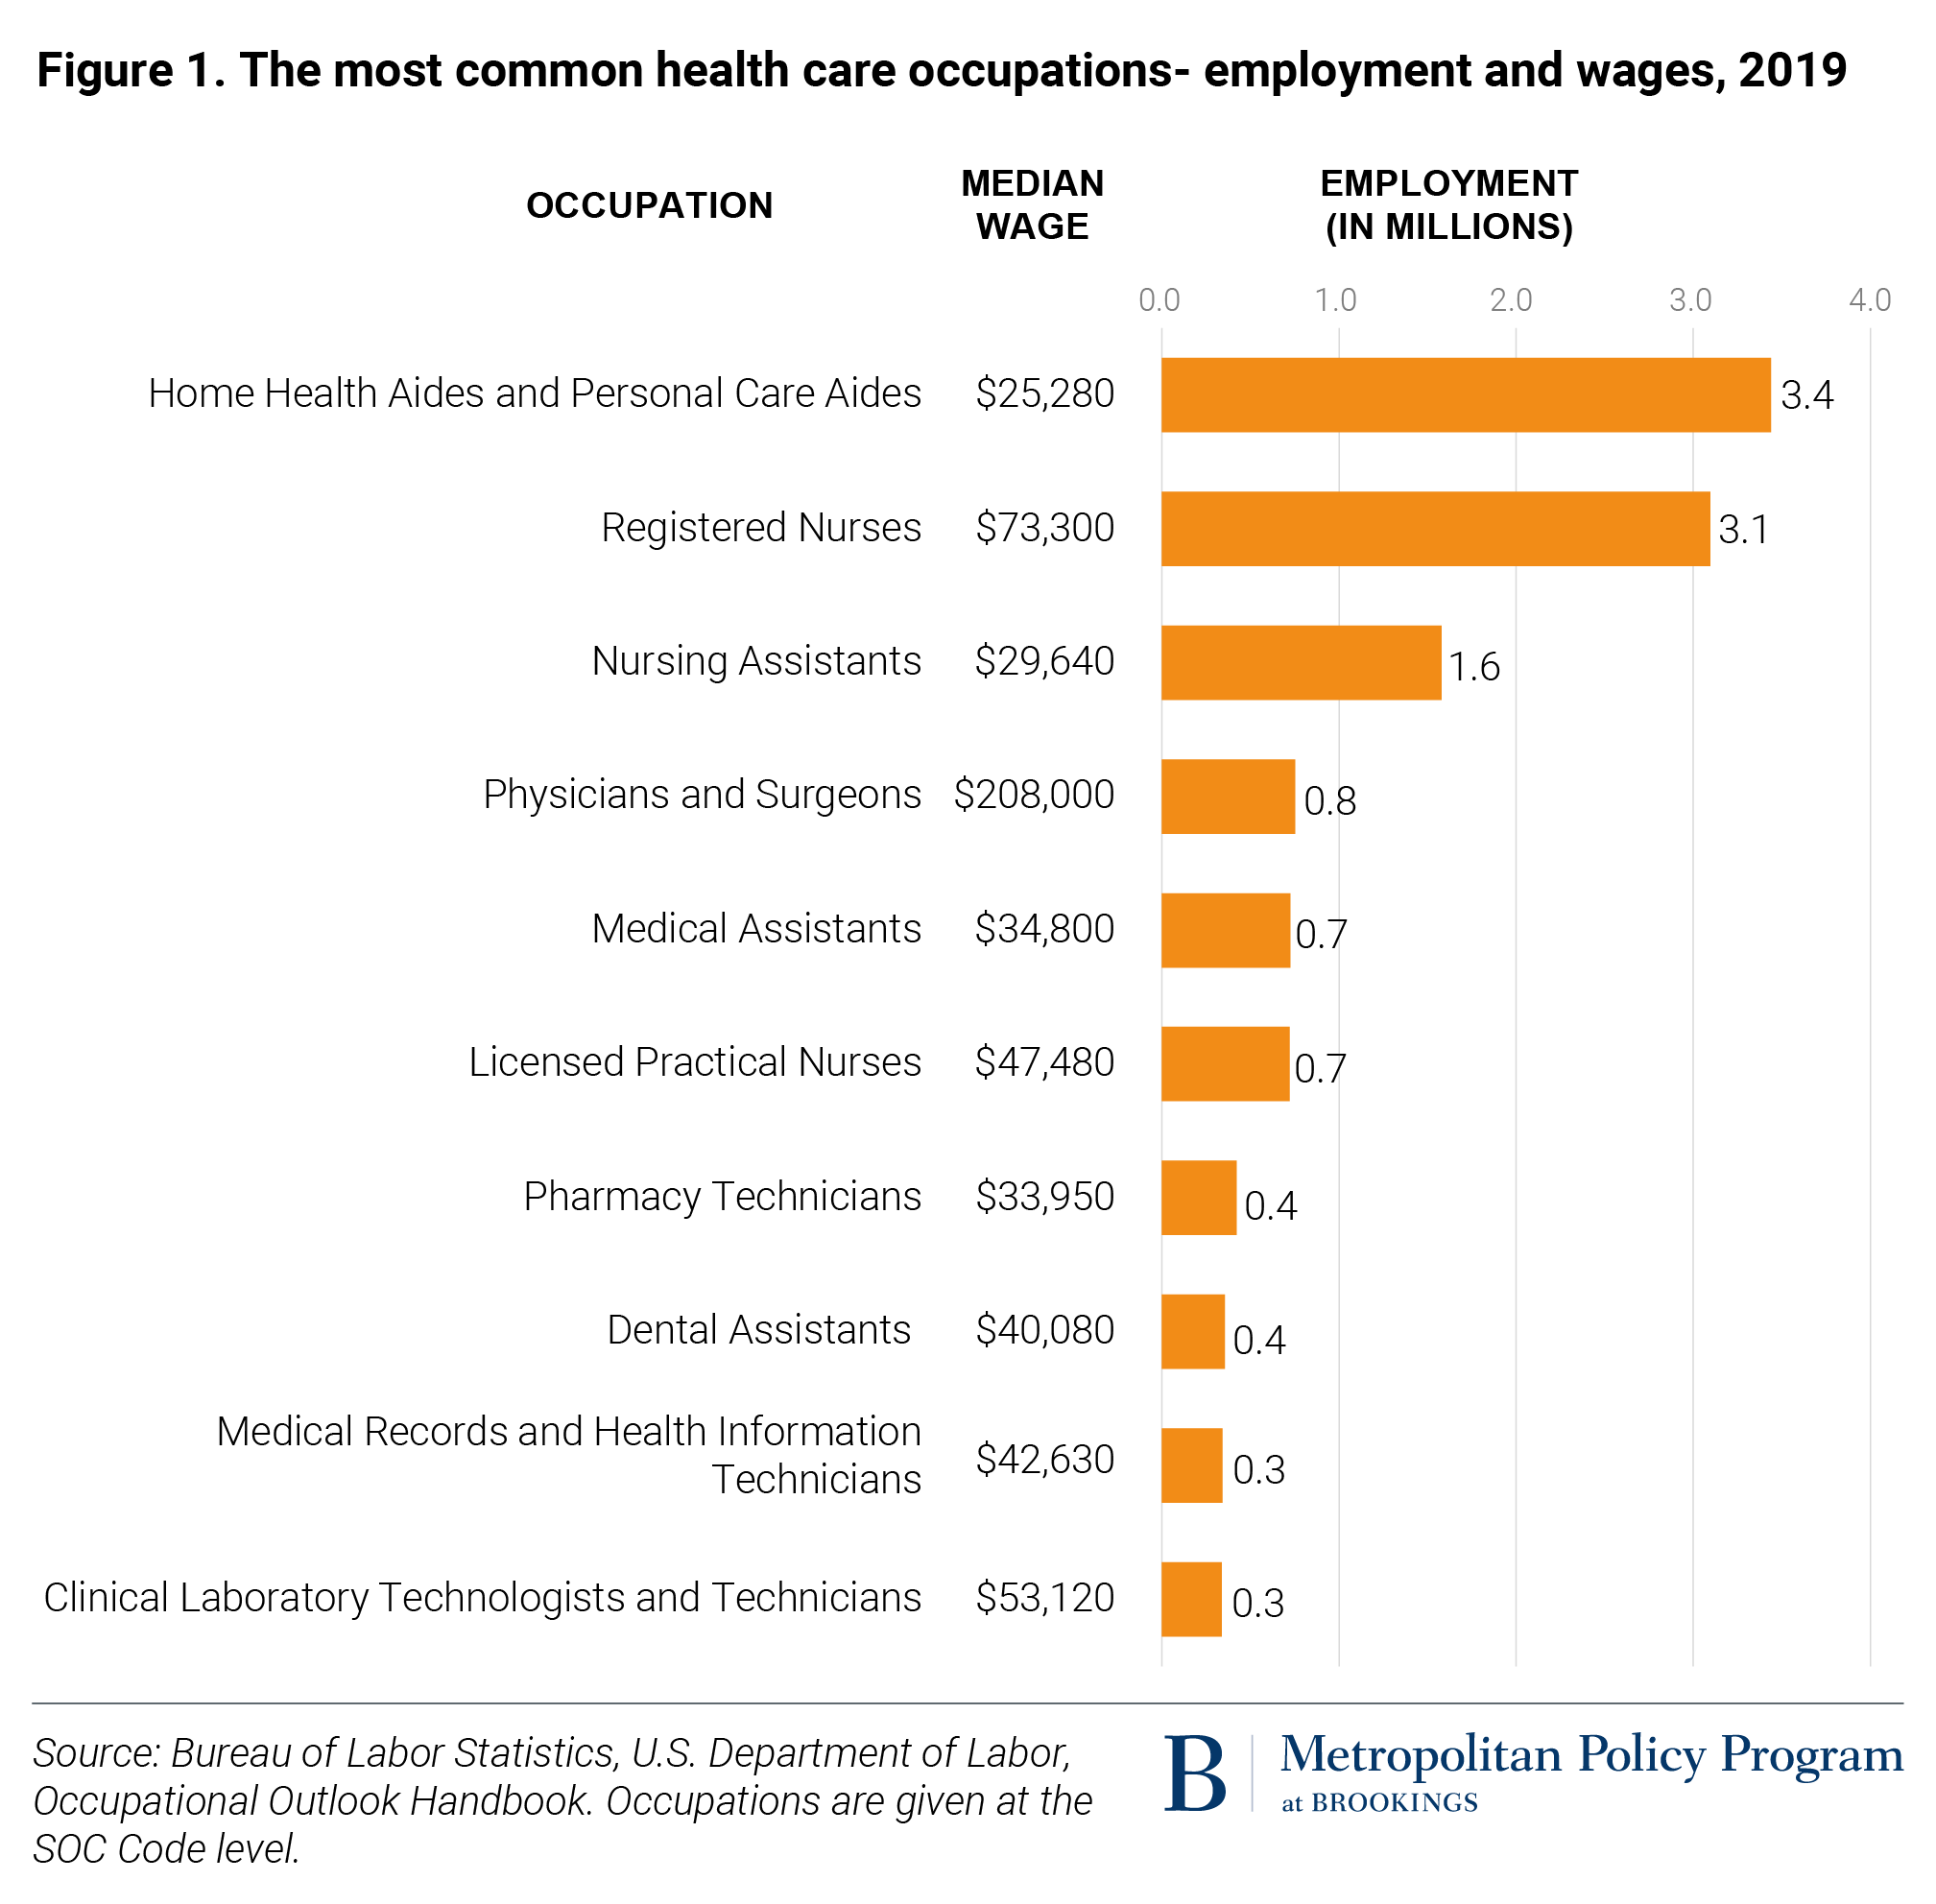 The health care workforce needs higher wages and better opportunities